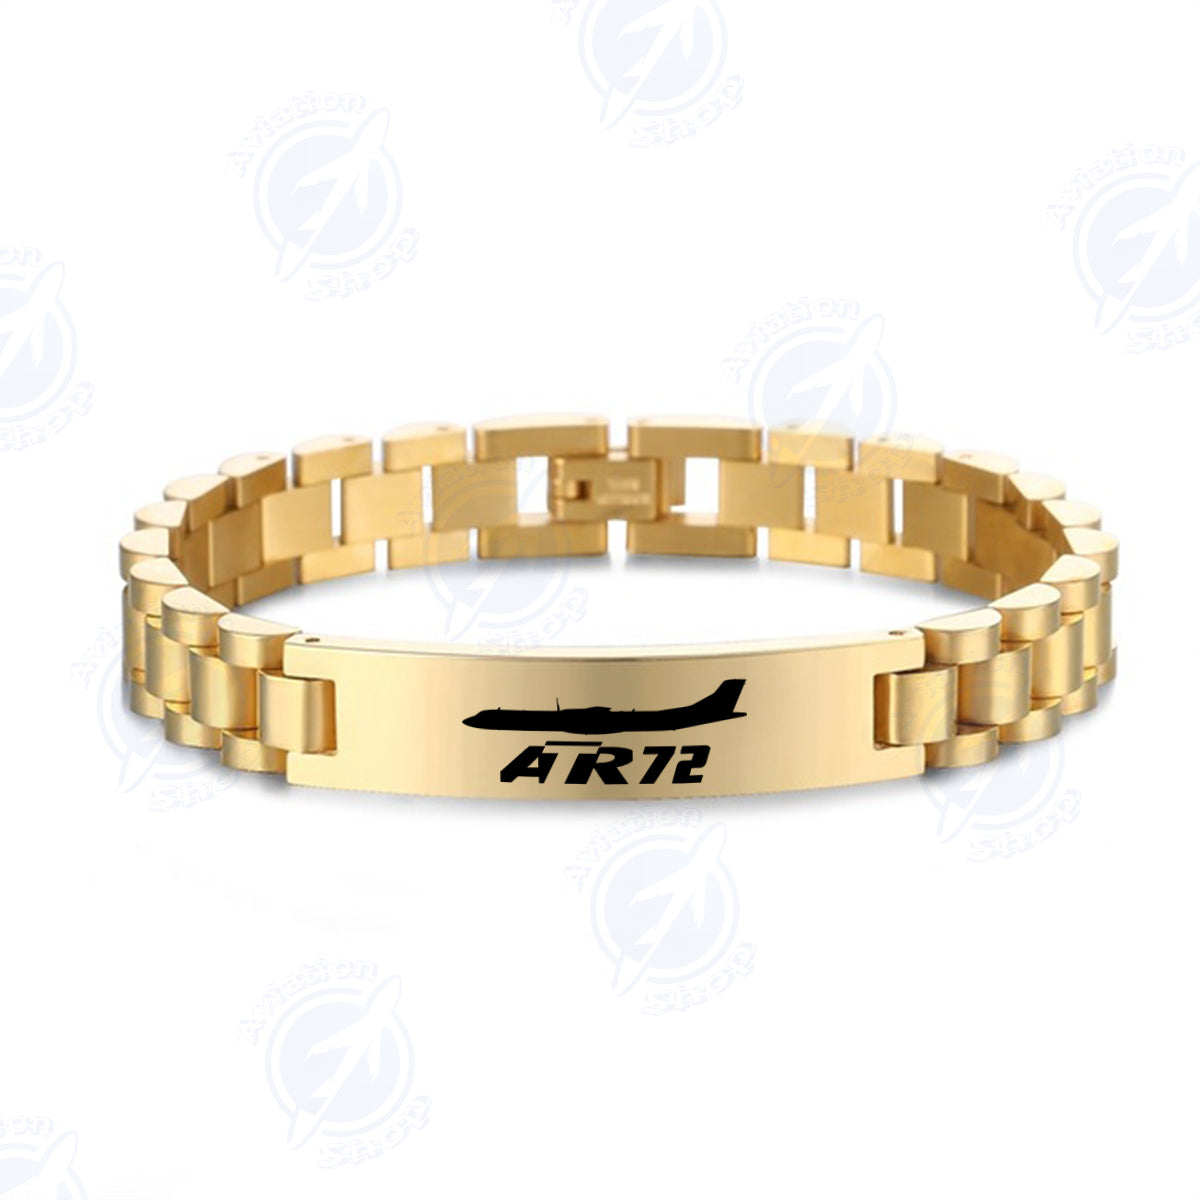 The ATR72 Designed Stainless Steel Chain Bracelets